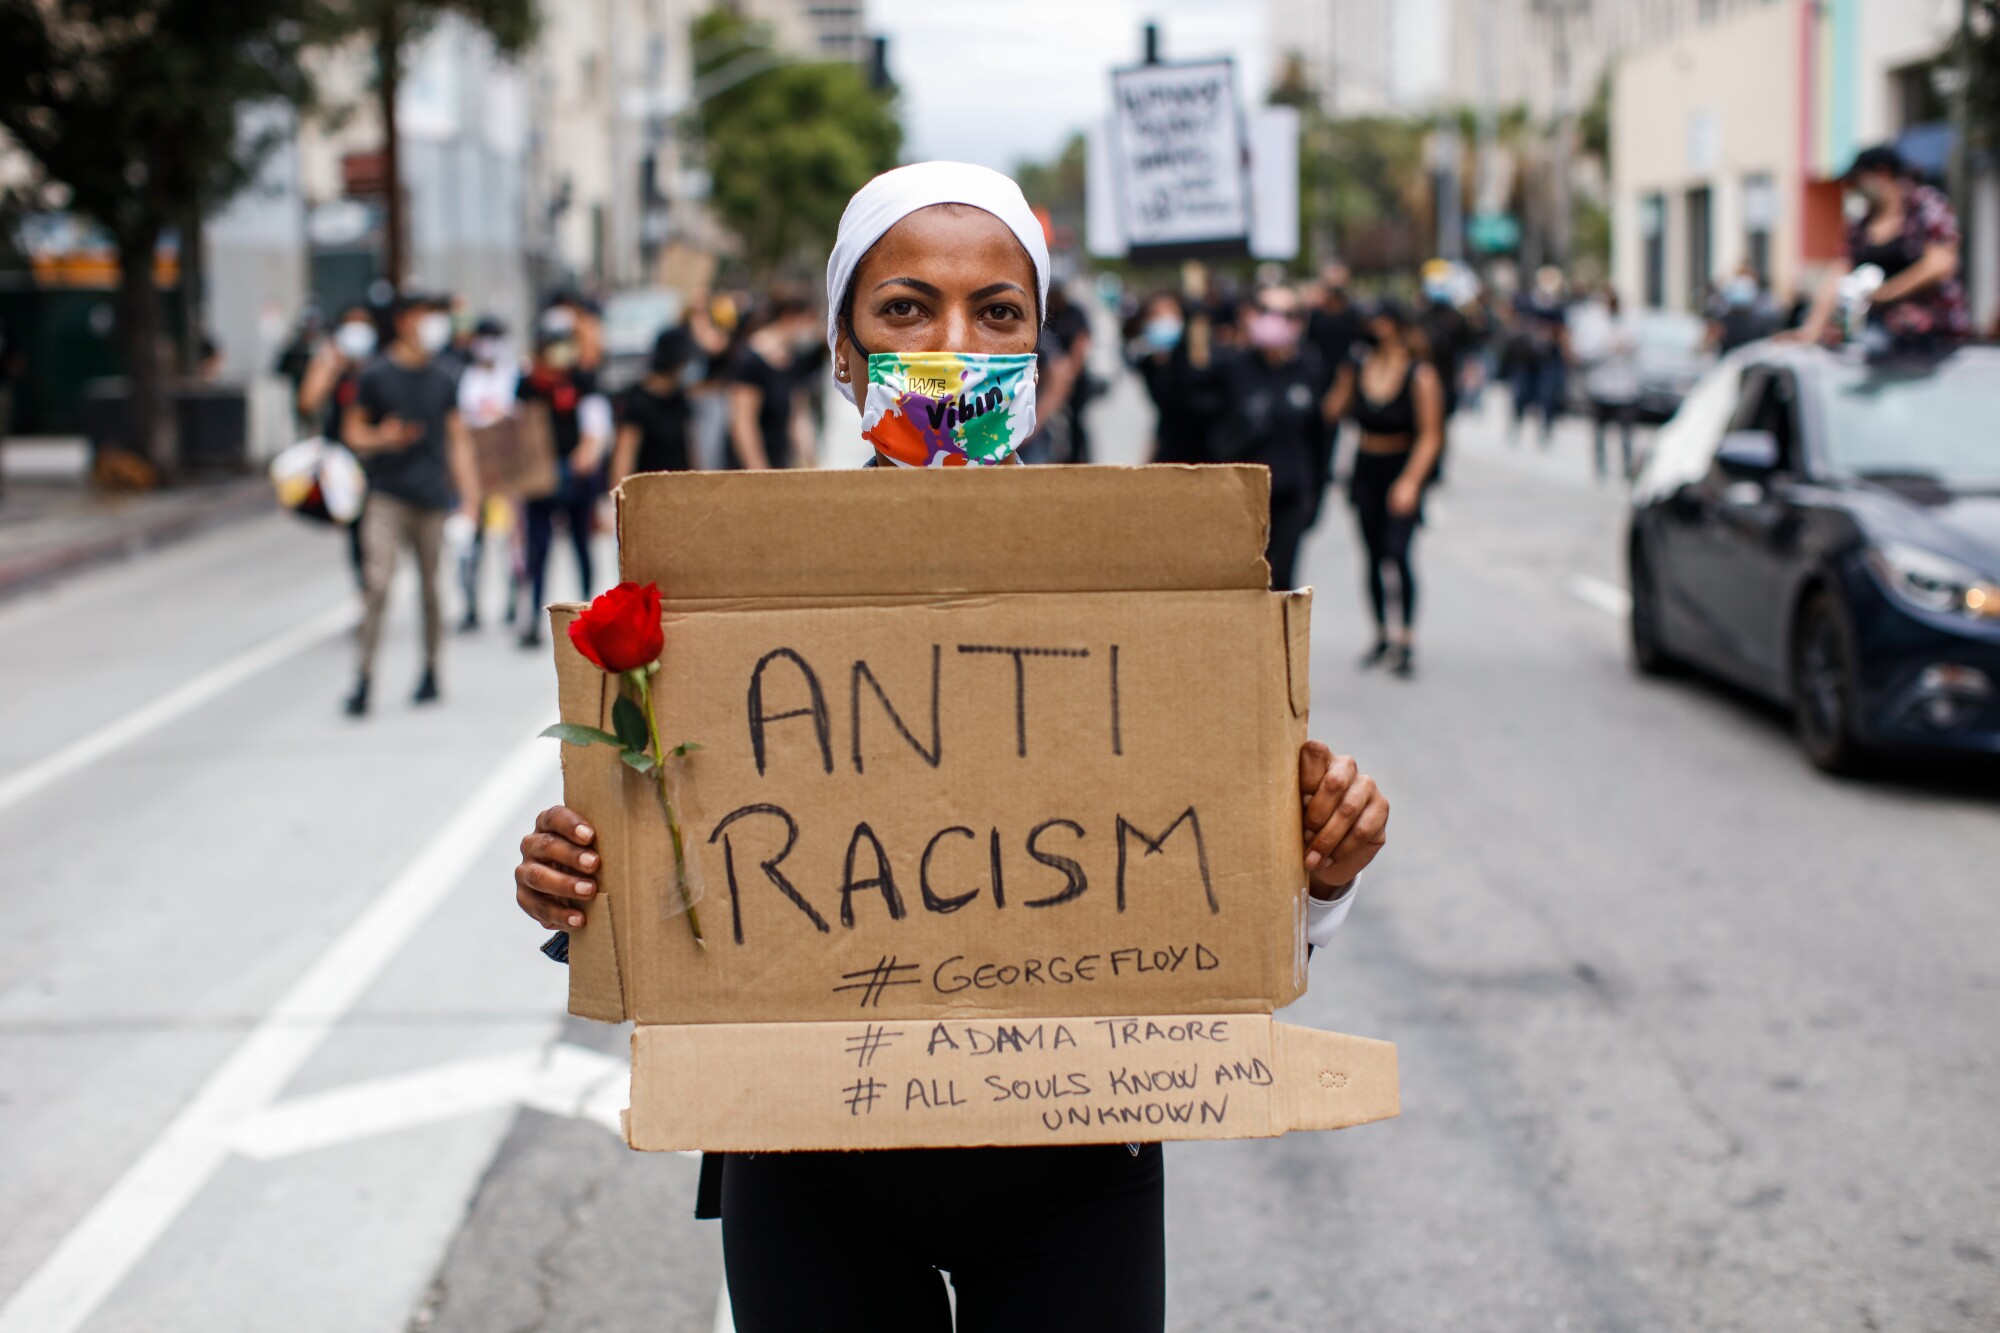 Katyana DeCampos, a citizen of France visiting California, marched with a sign with the words "Anti Racism" in downtown L.A.